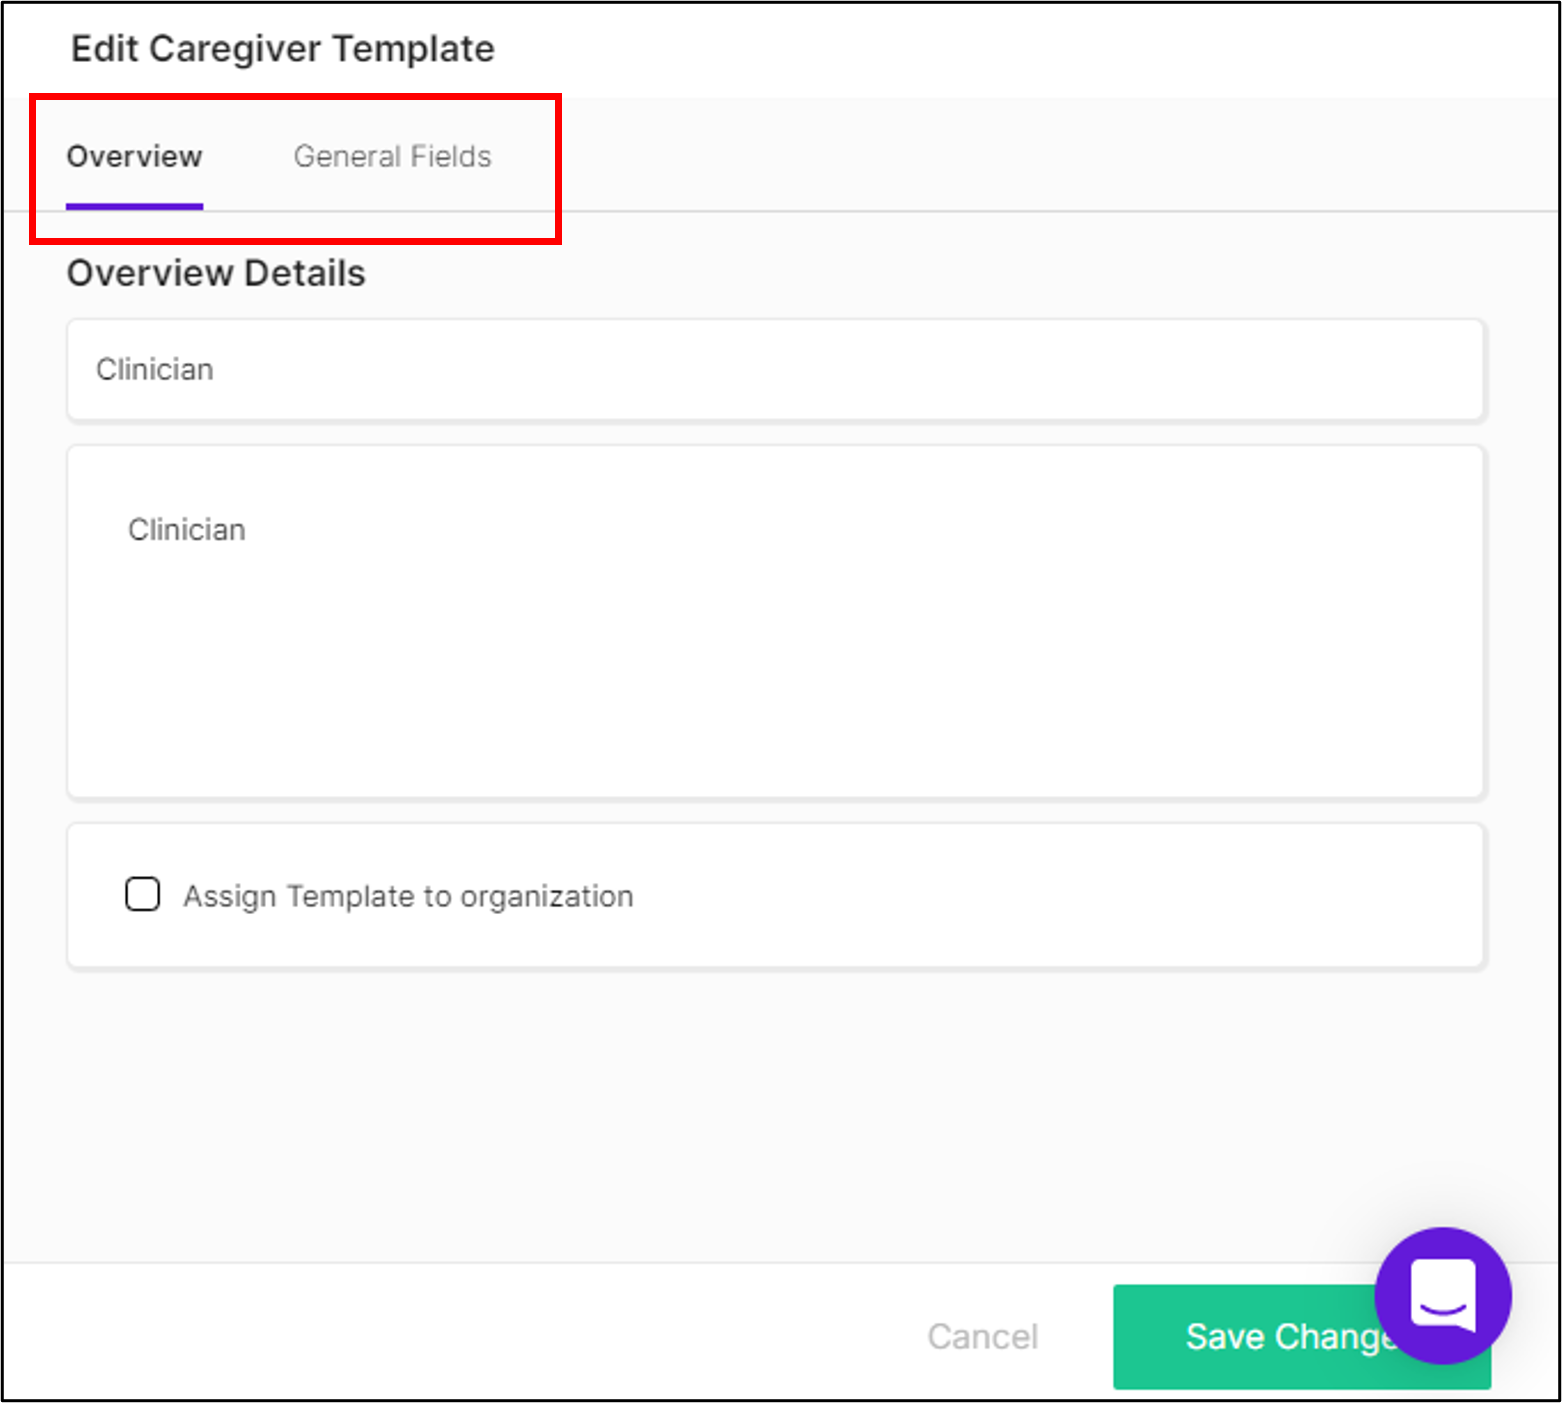 Edit Caregiver Template Overview